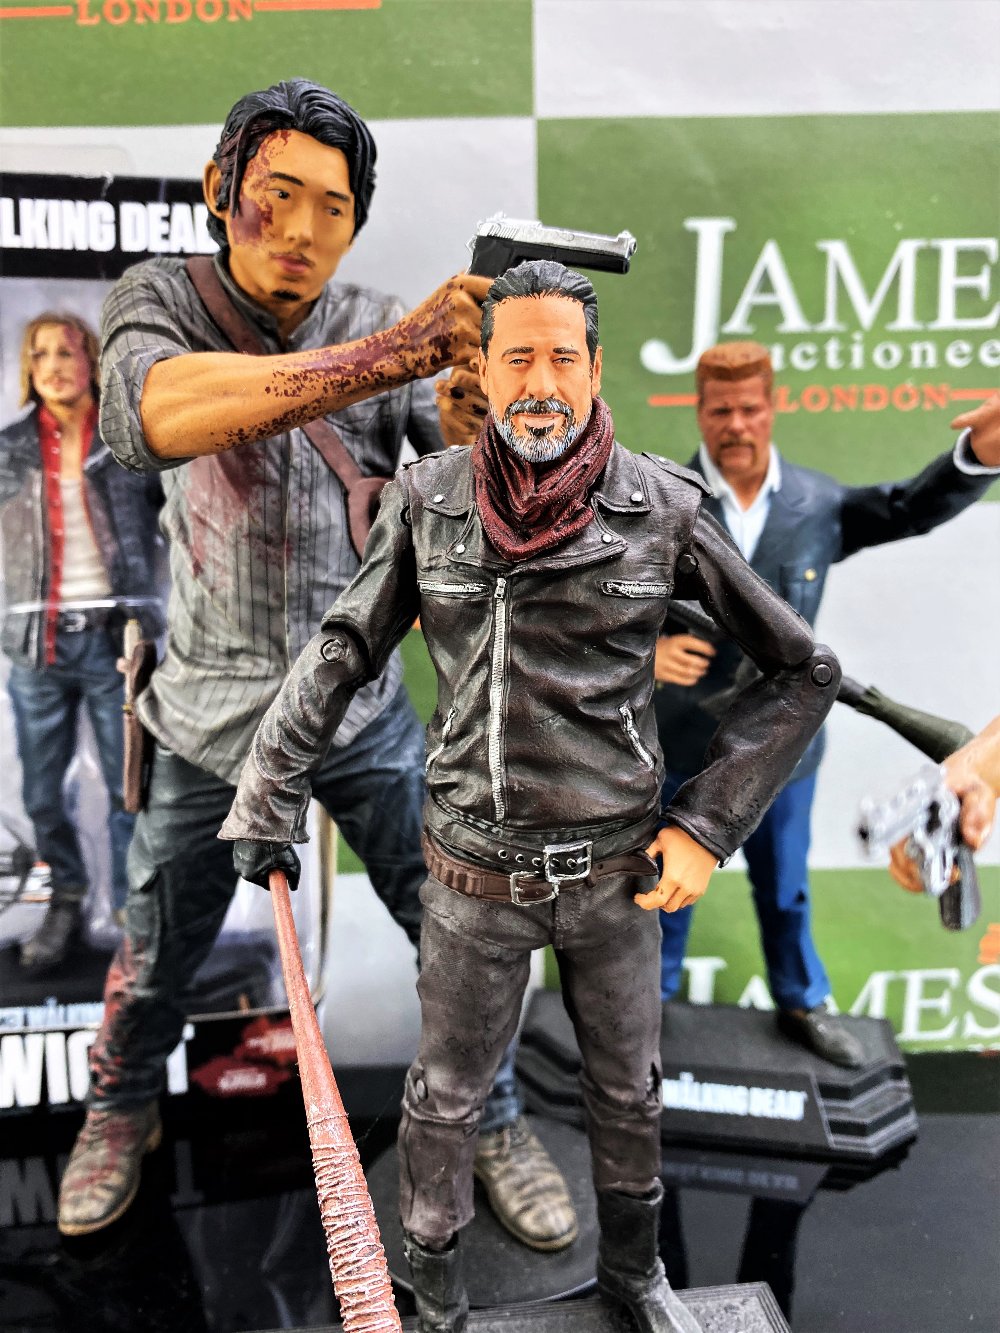 Collection of AMC Walking Dead Figures - Image 4 of 4